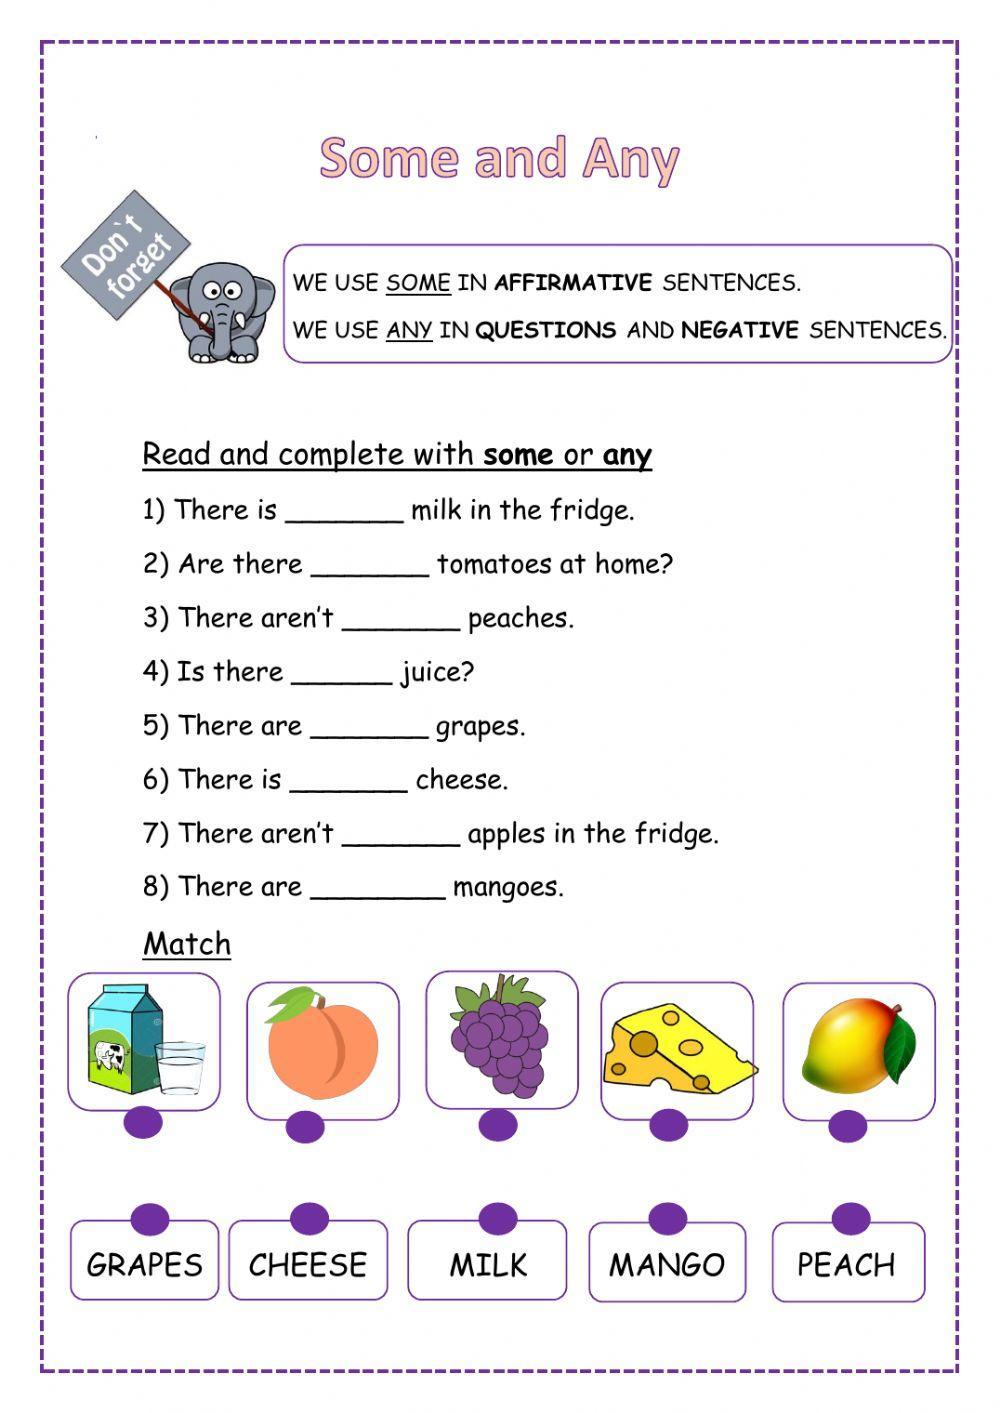 Some and Any interactive worksheet for grade 4